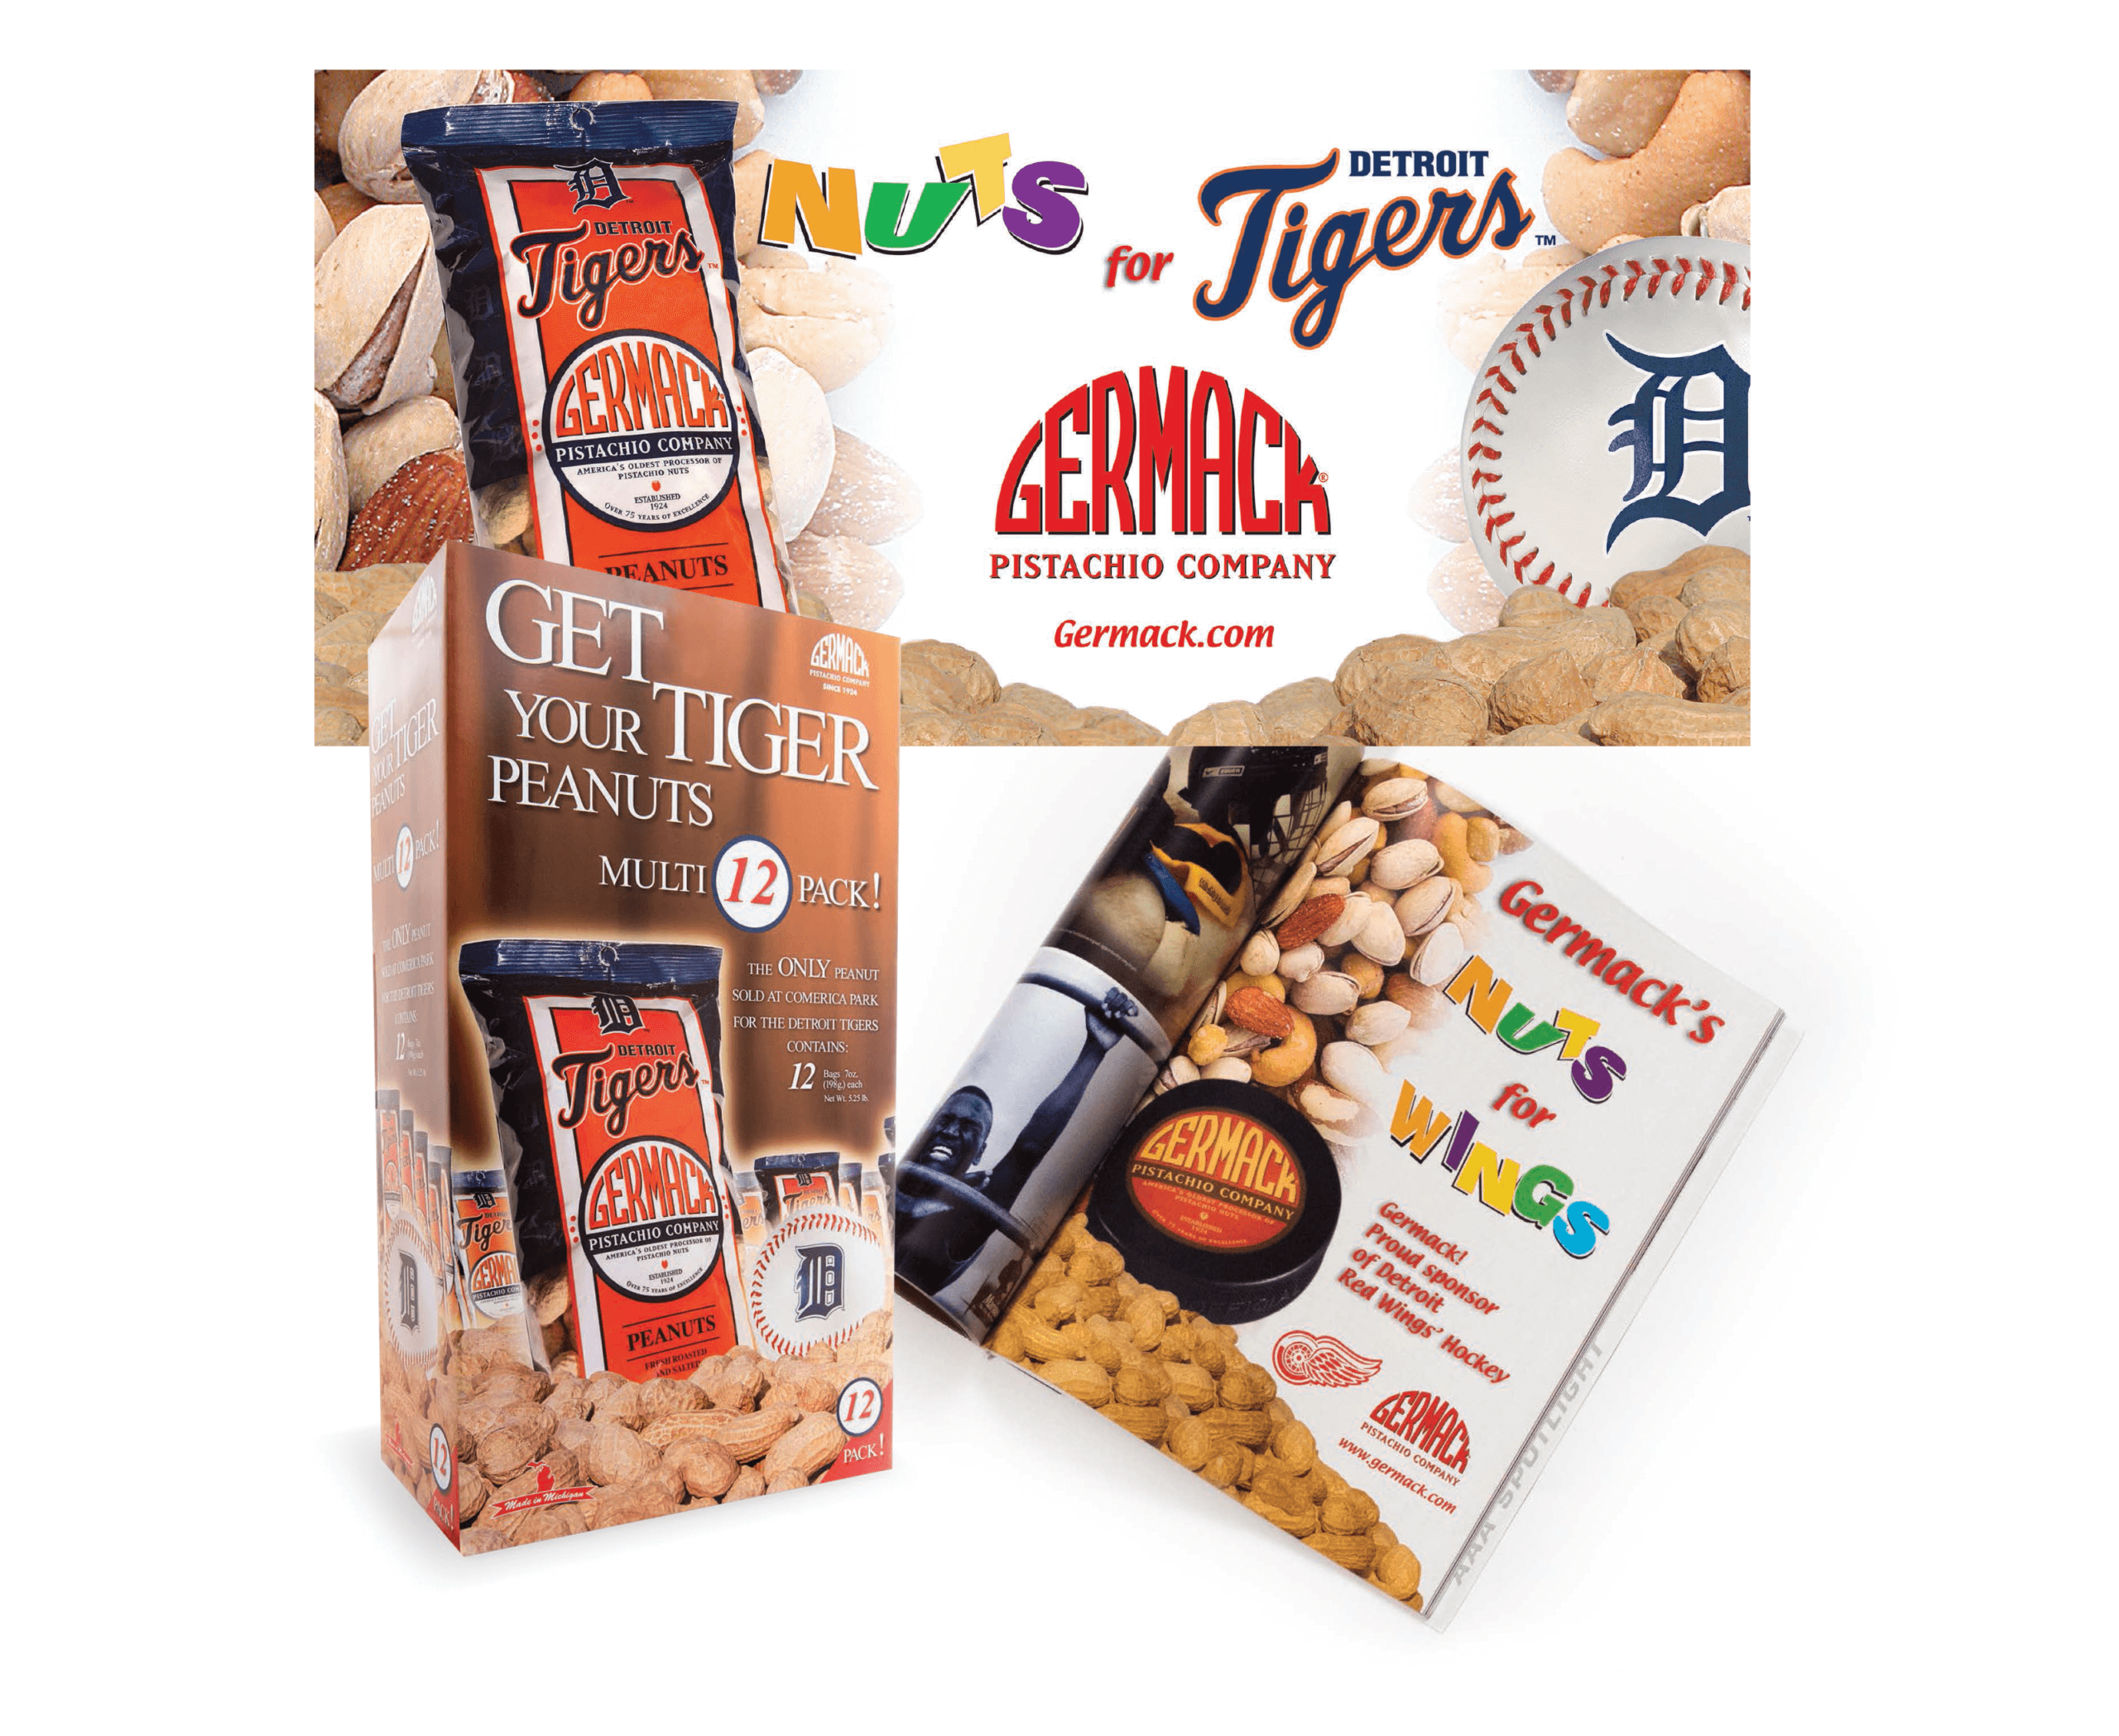 Award-winning packaging for Germack peanuts showing multi-pack box, banner and hockey ad